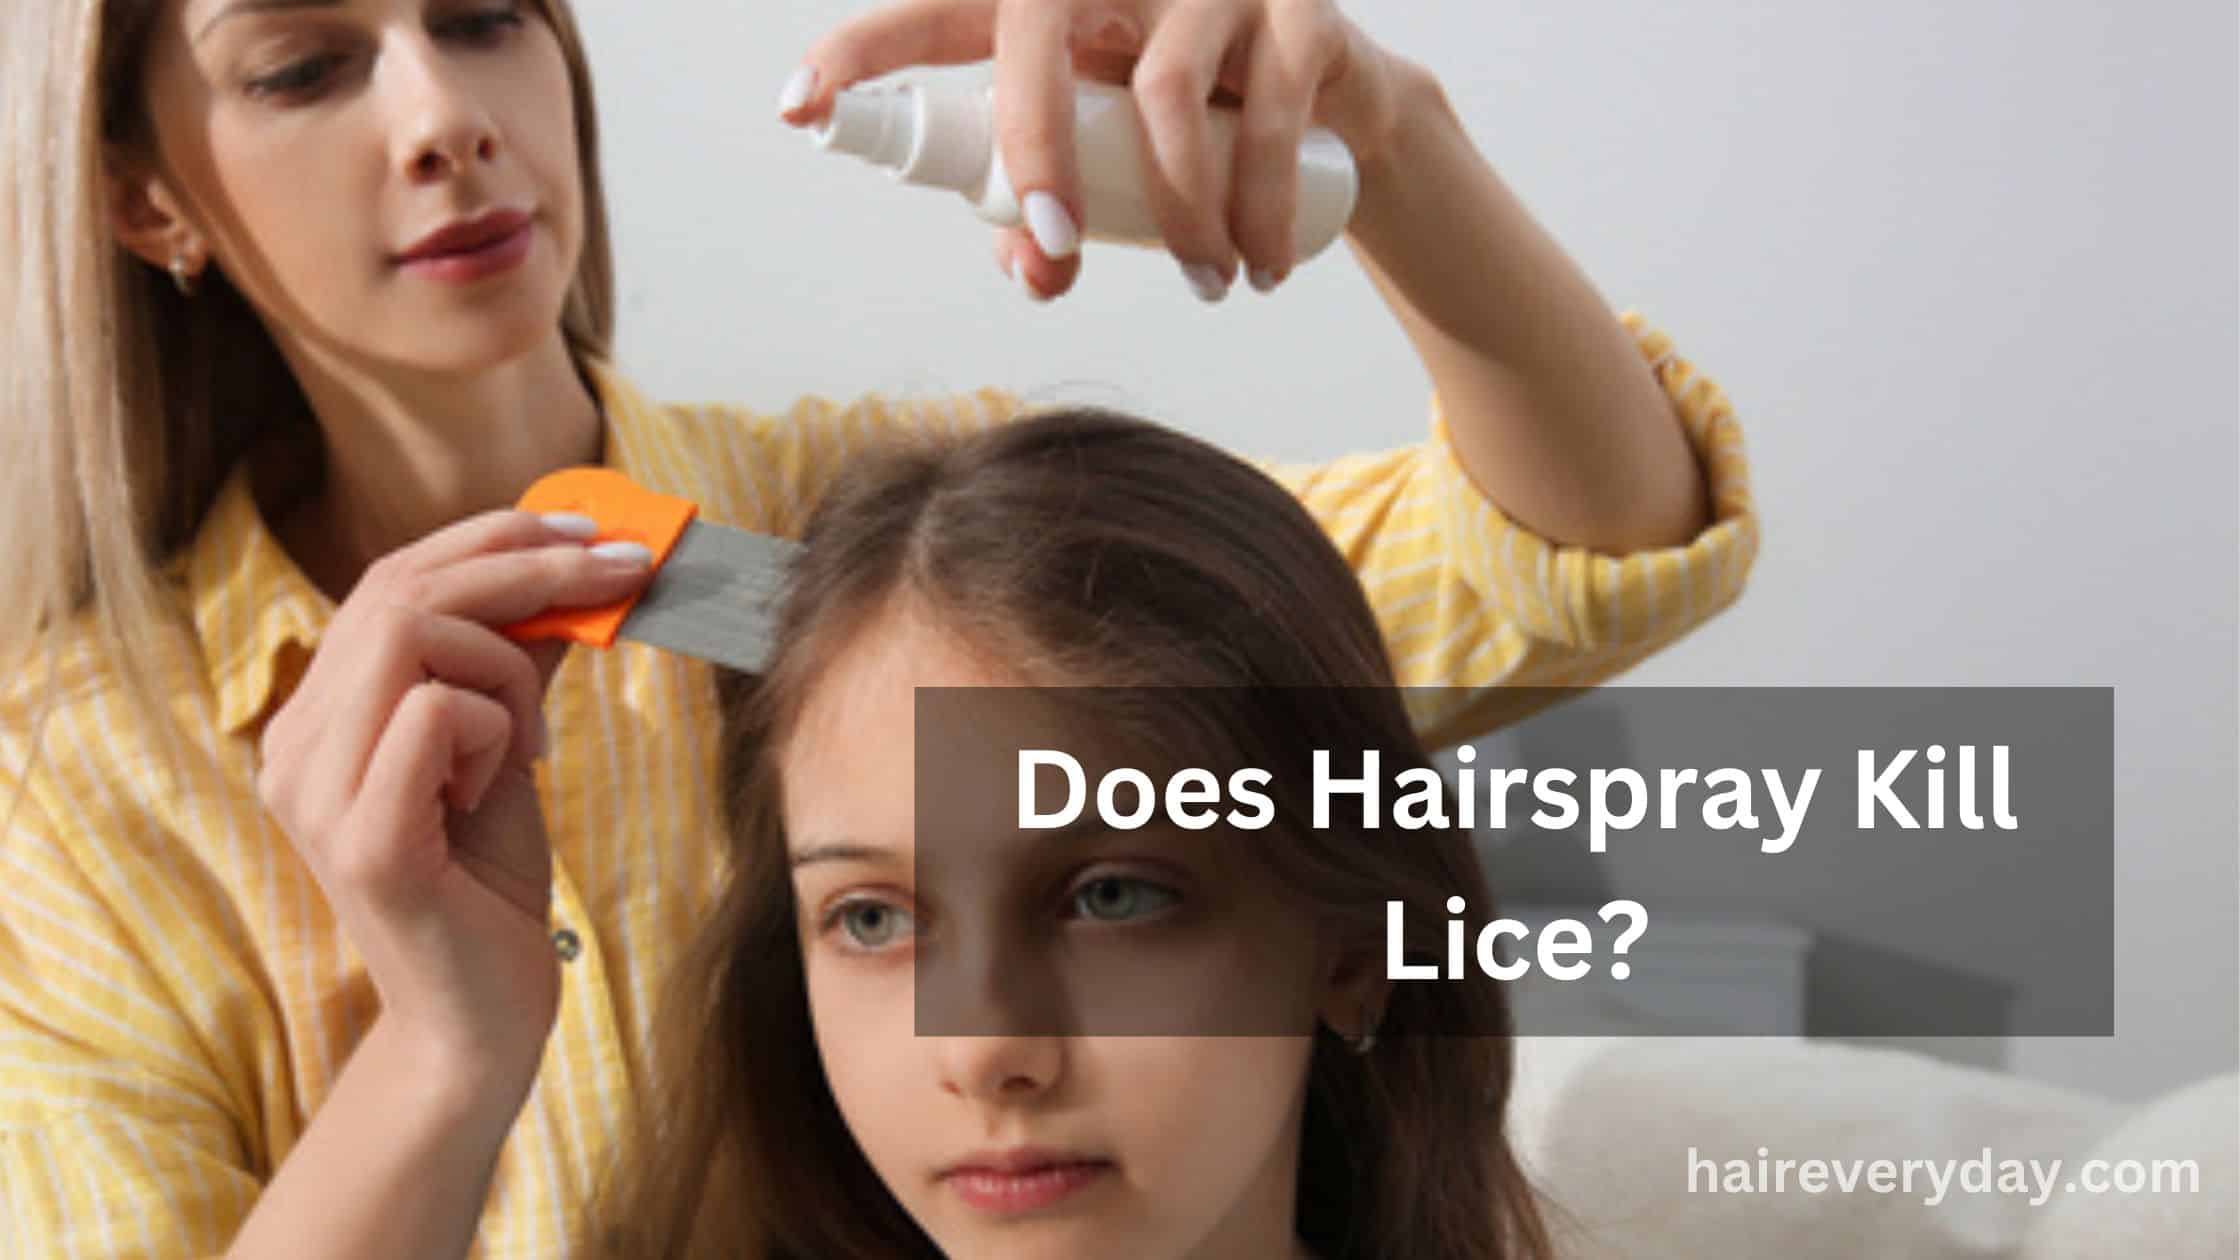 Does Hairspray Kill Lice? - Hair Everyday Review